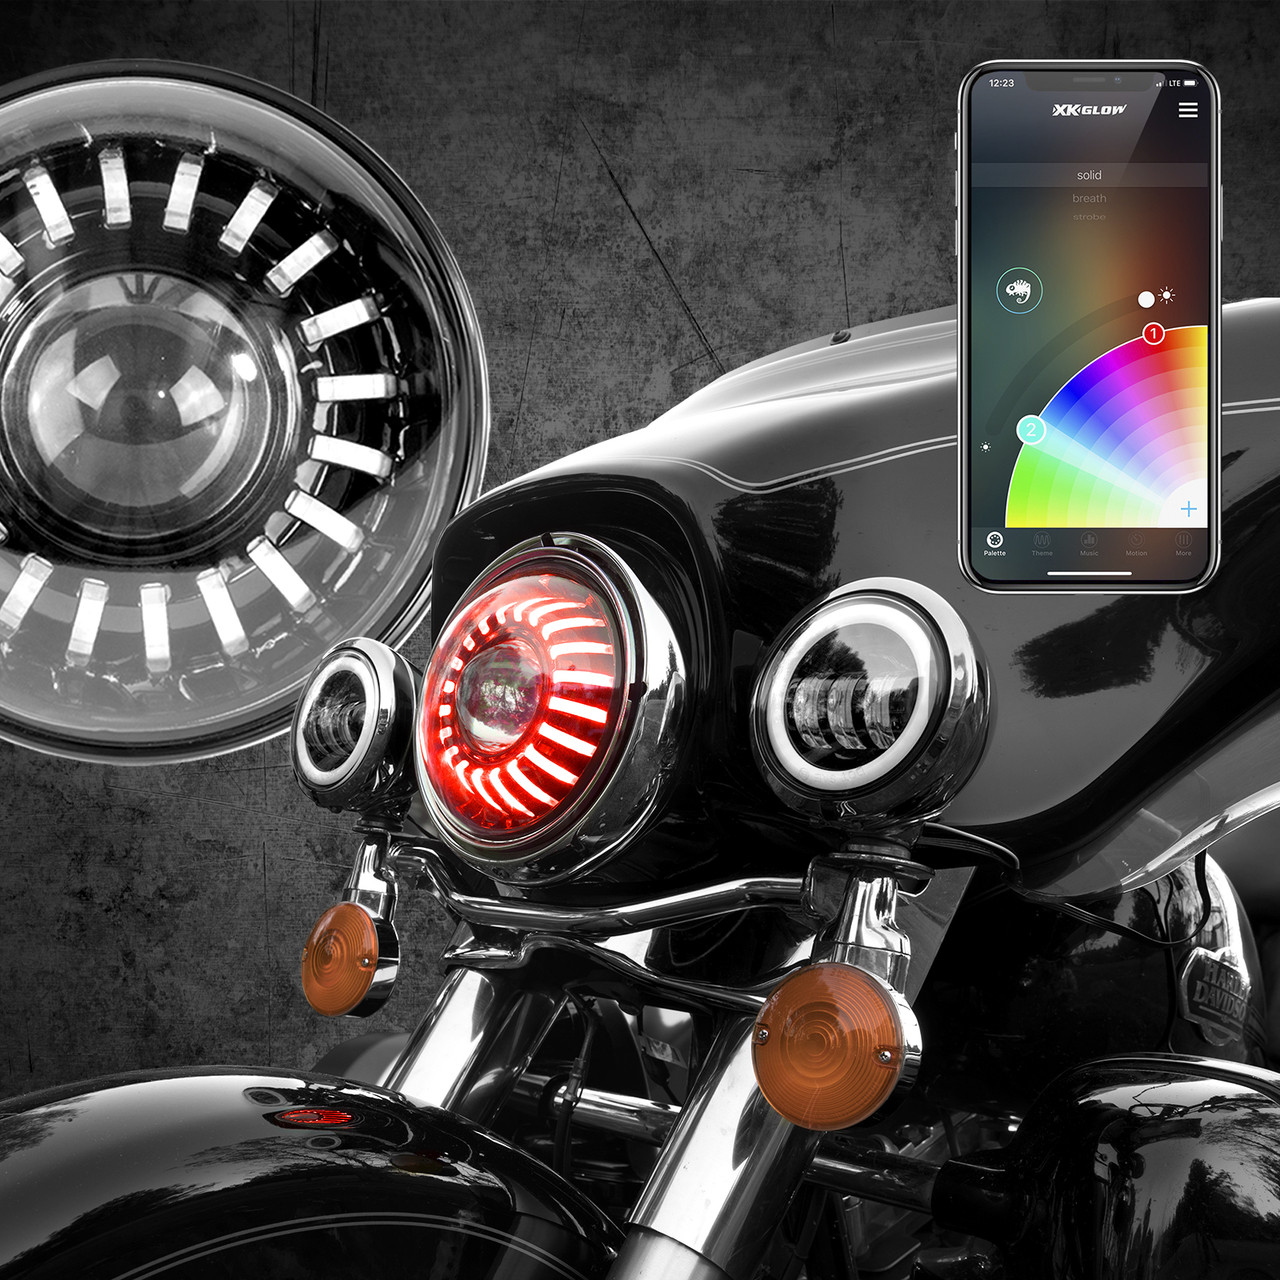 Aukmak Super Bright Version 7 inch LED Headlights with White Halo DRL  Headlamp fit for Harley Davidson Motorcycle